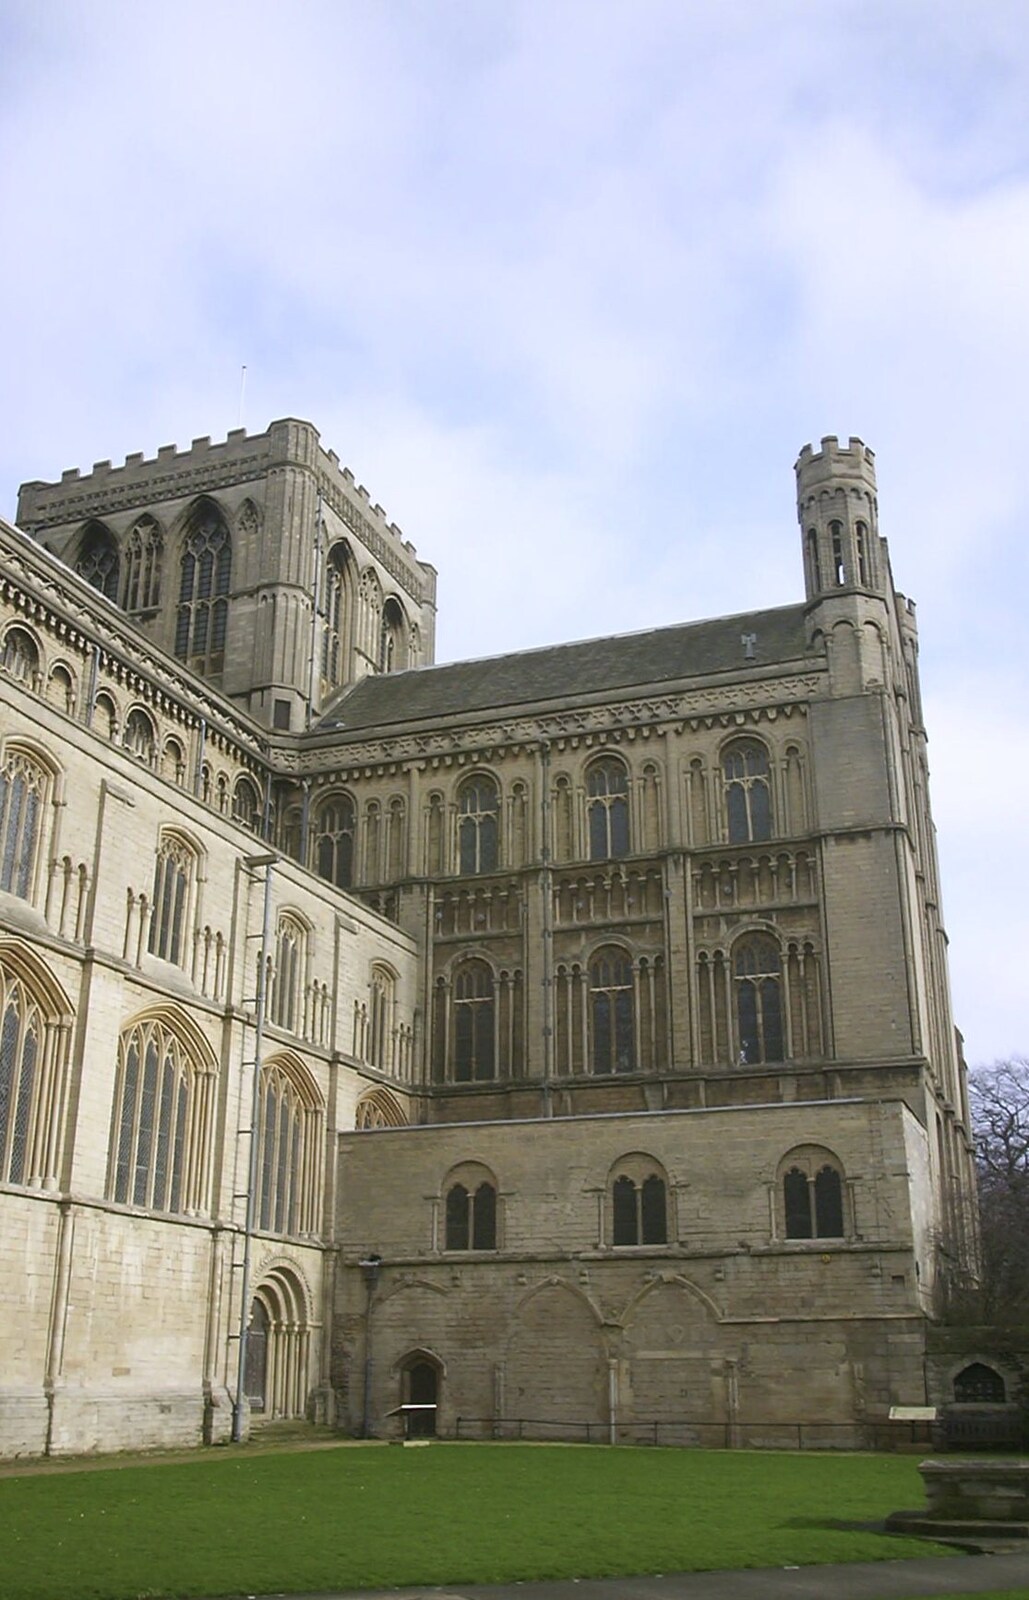 An exterior view of the transept from Longview, Easyworld and Peterborough Cathedral, Cambridgeshire - 10th February 2003